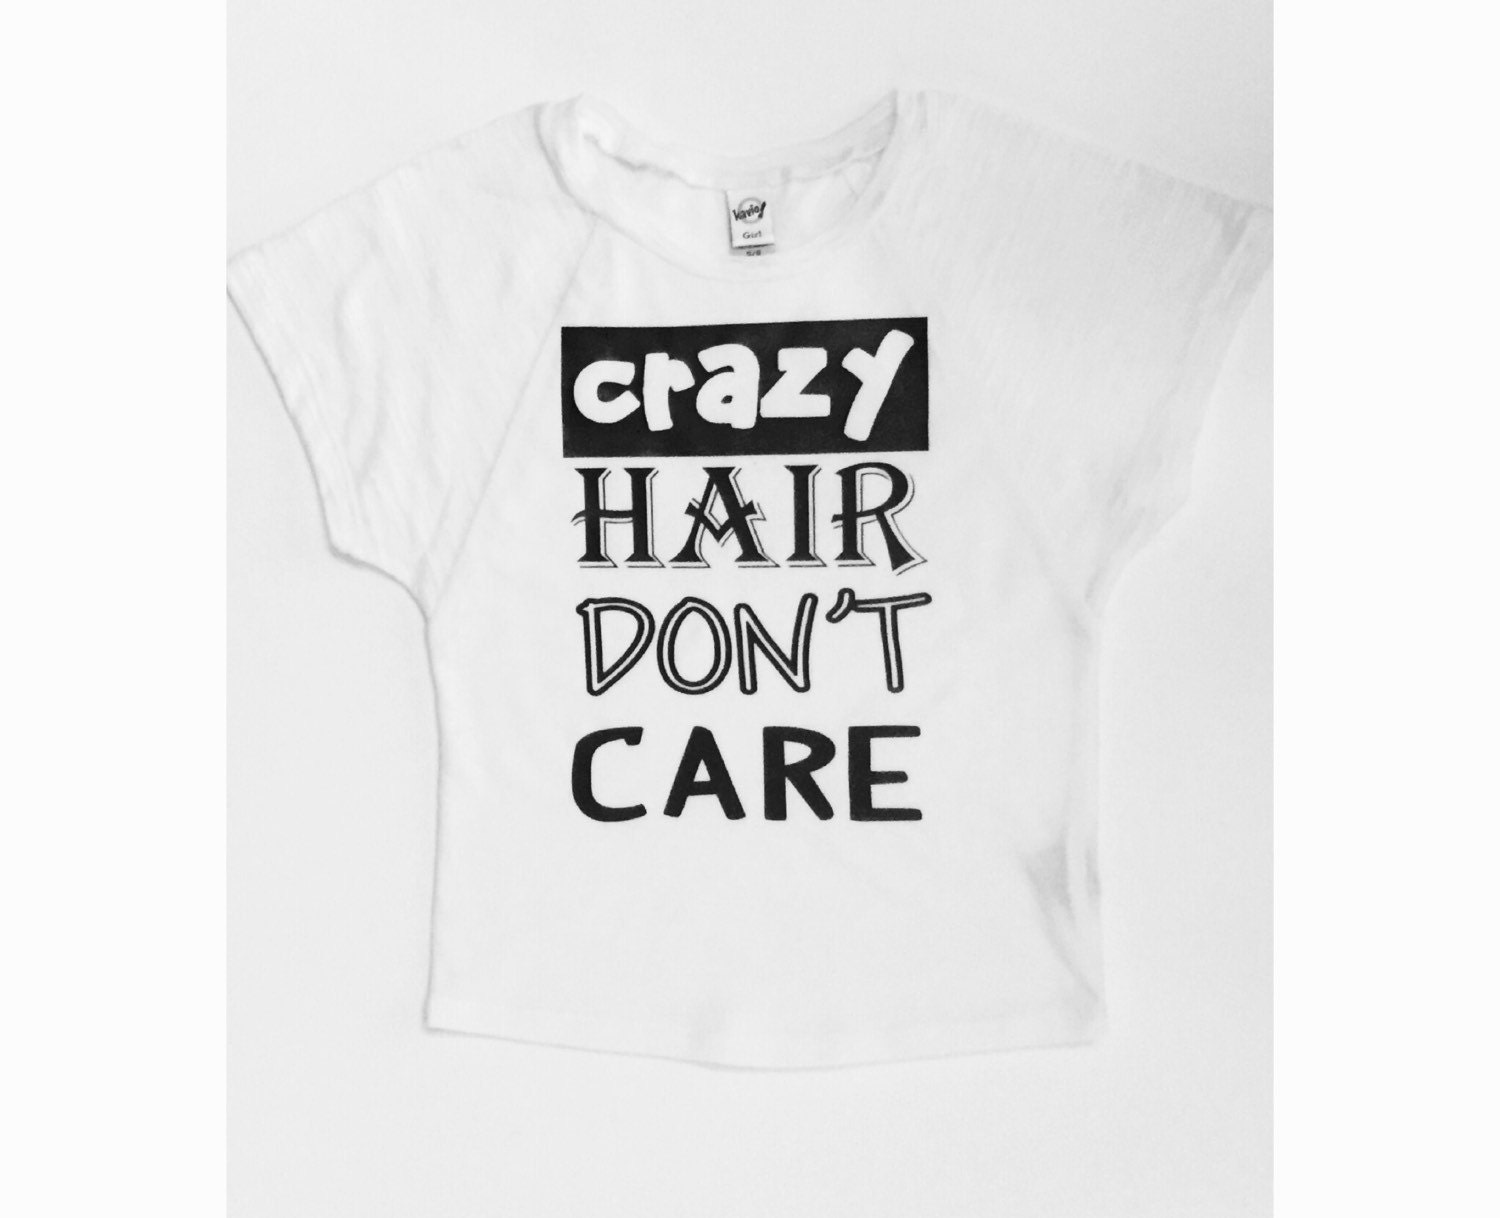 Crazy Hair Don't Care // Girls Shirt // Women's by ForeverYoungCo